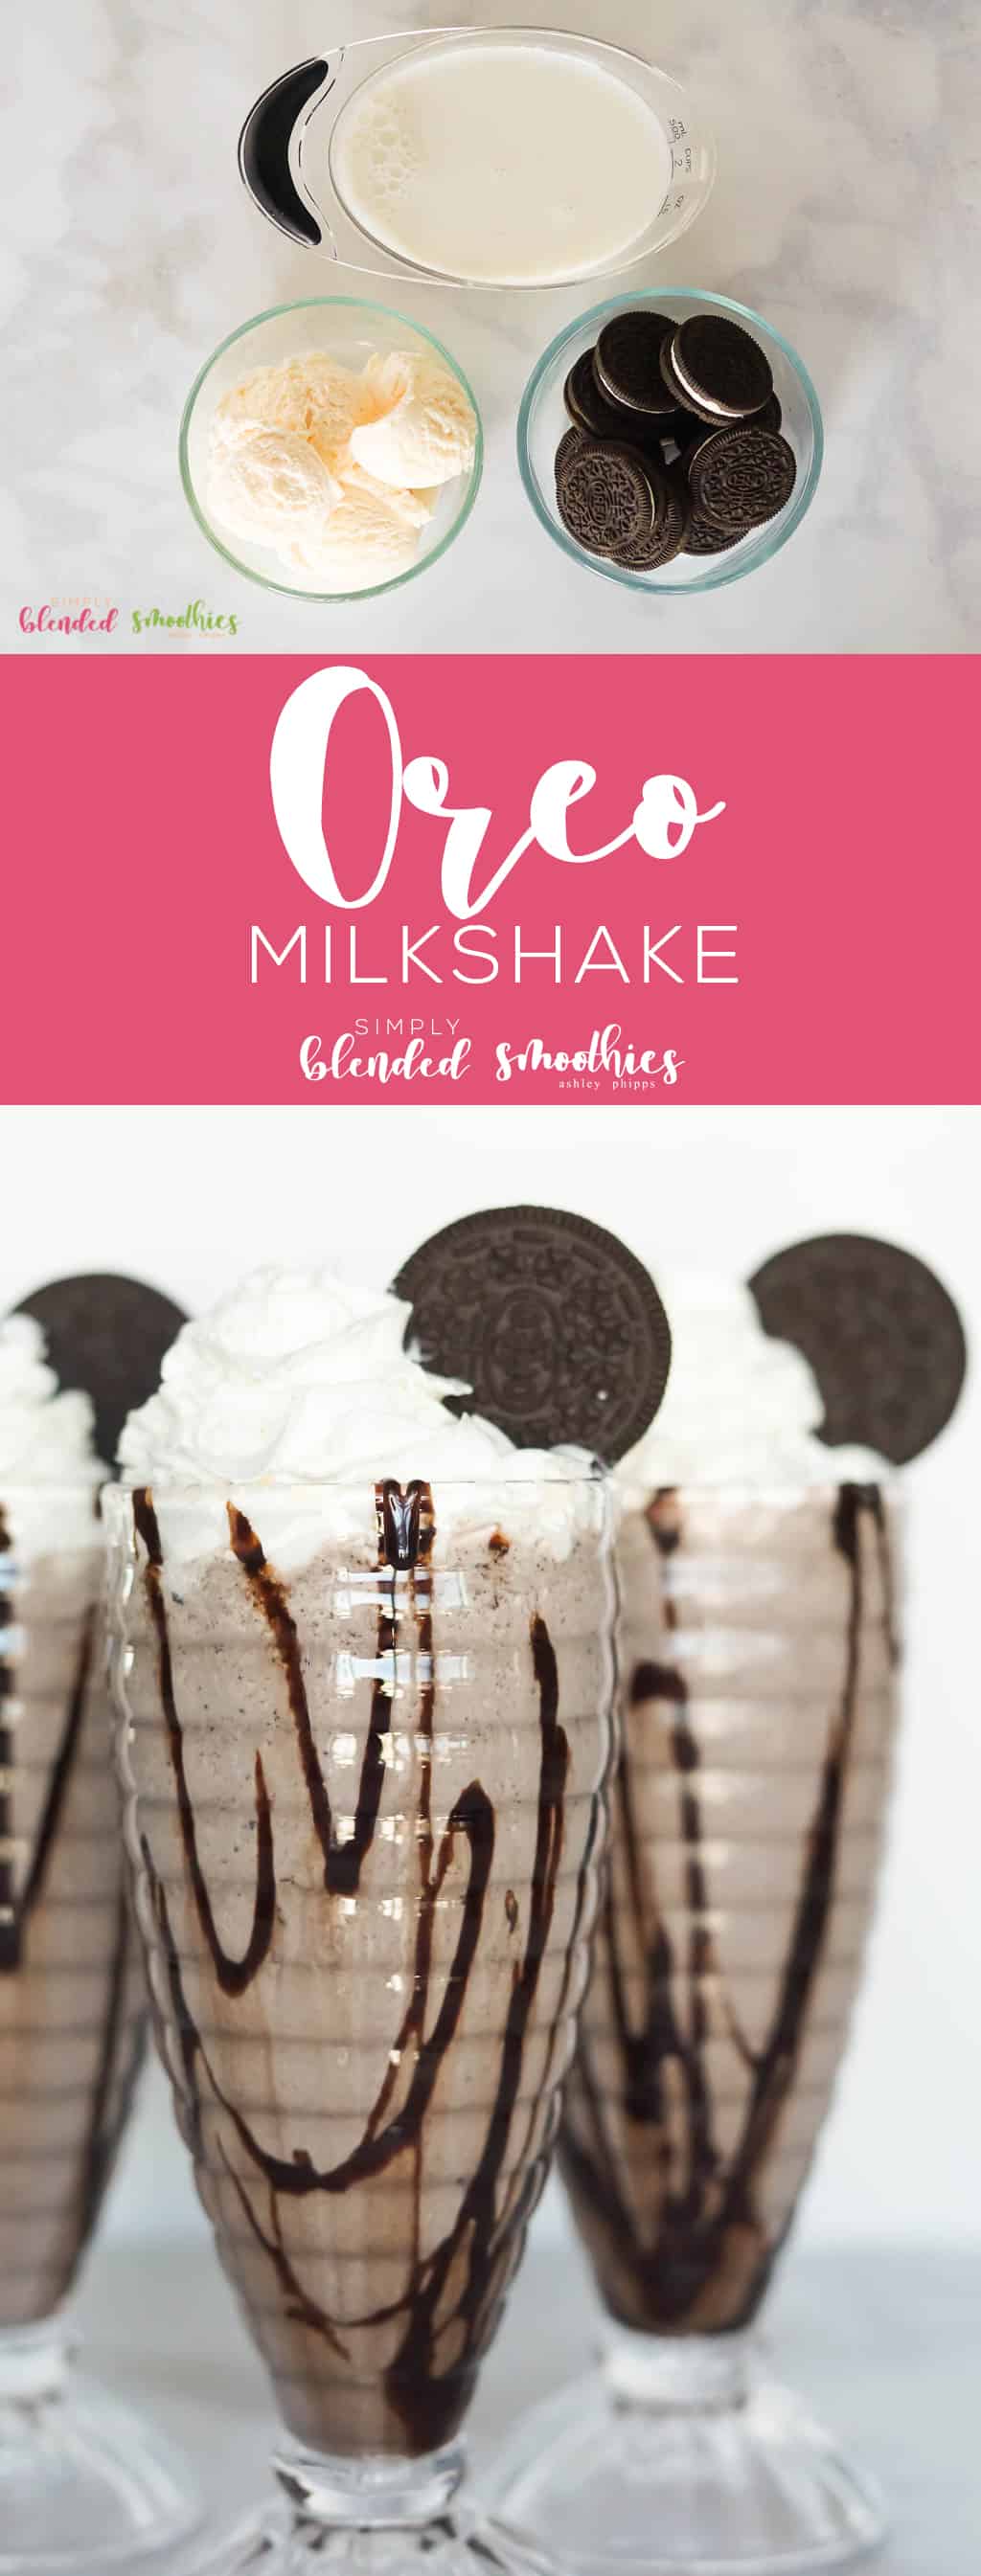 Oreos Are One Of My Favorite Cookies (#Guiltypleasure) And This Oreo Milkshake Is Equally As Creamy And Delicious As Those Yummy Cookies Are